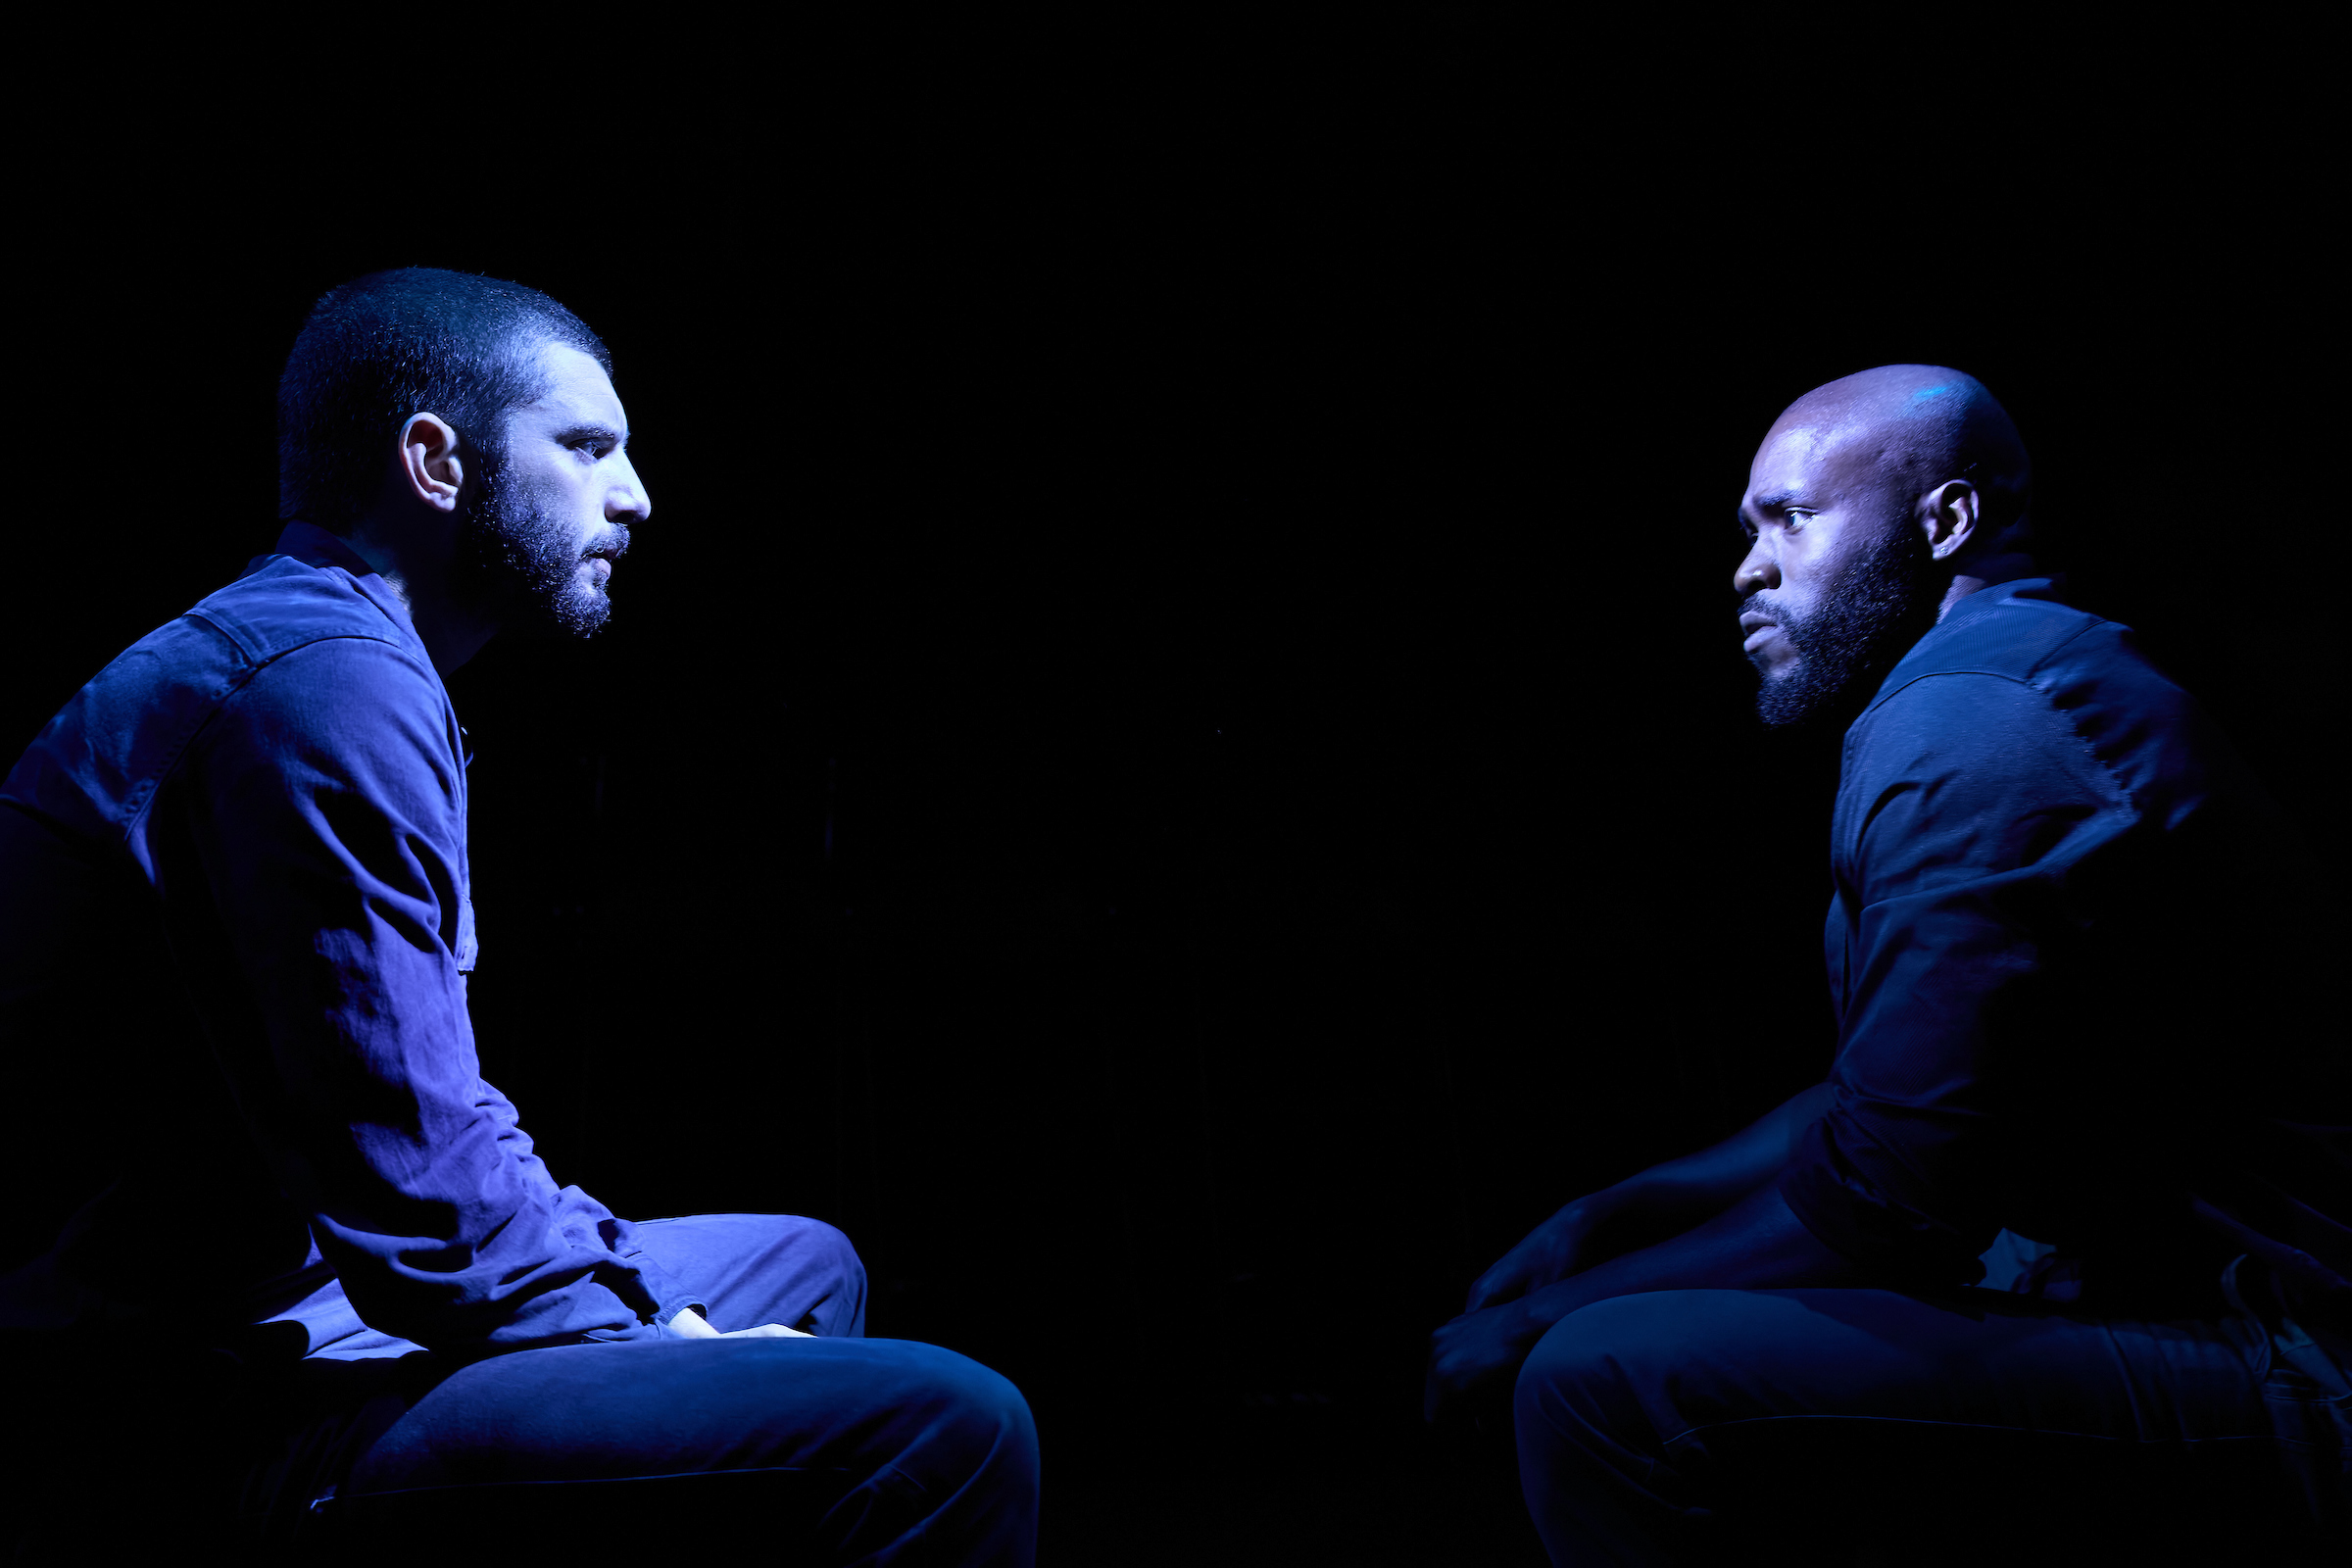 Michael C. Fox (Iago) and Martins Imhangbe (Othello) in Othello, Photo by Mark Douet